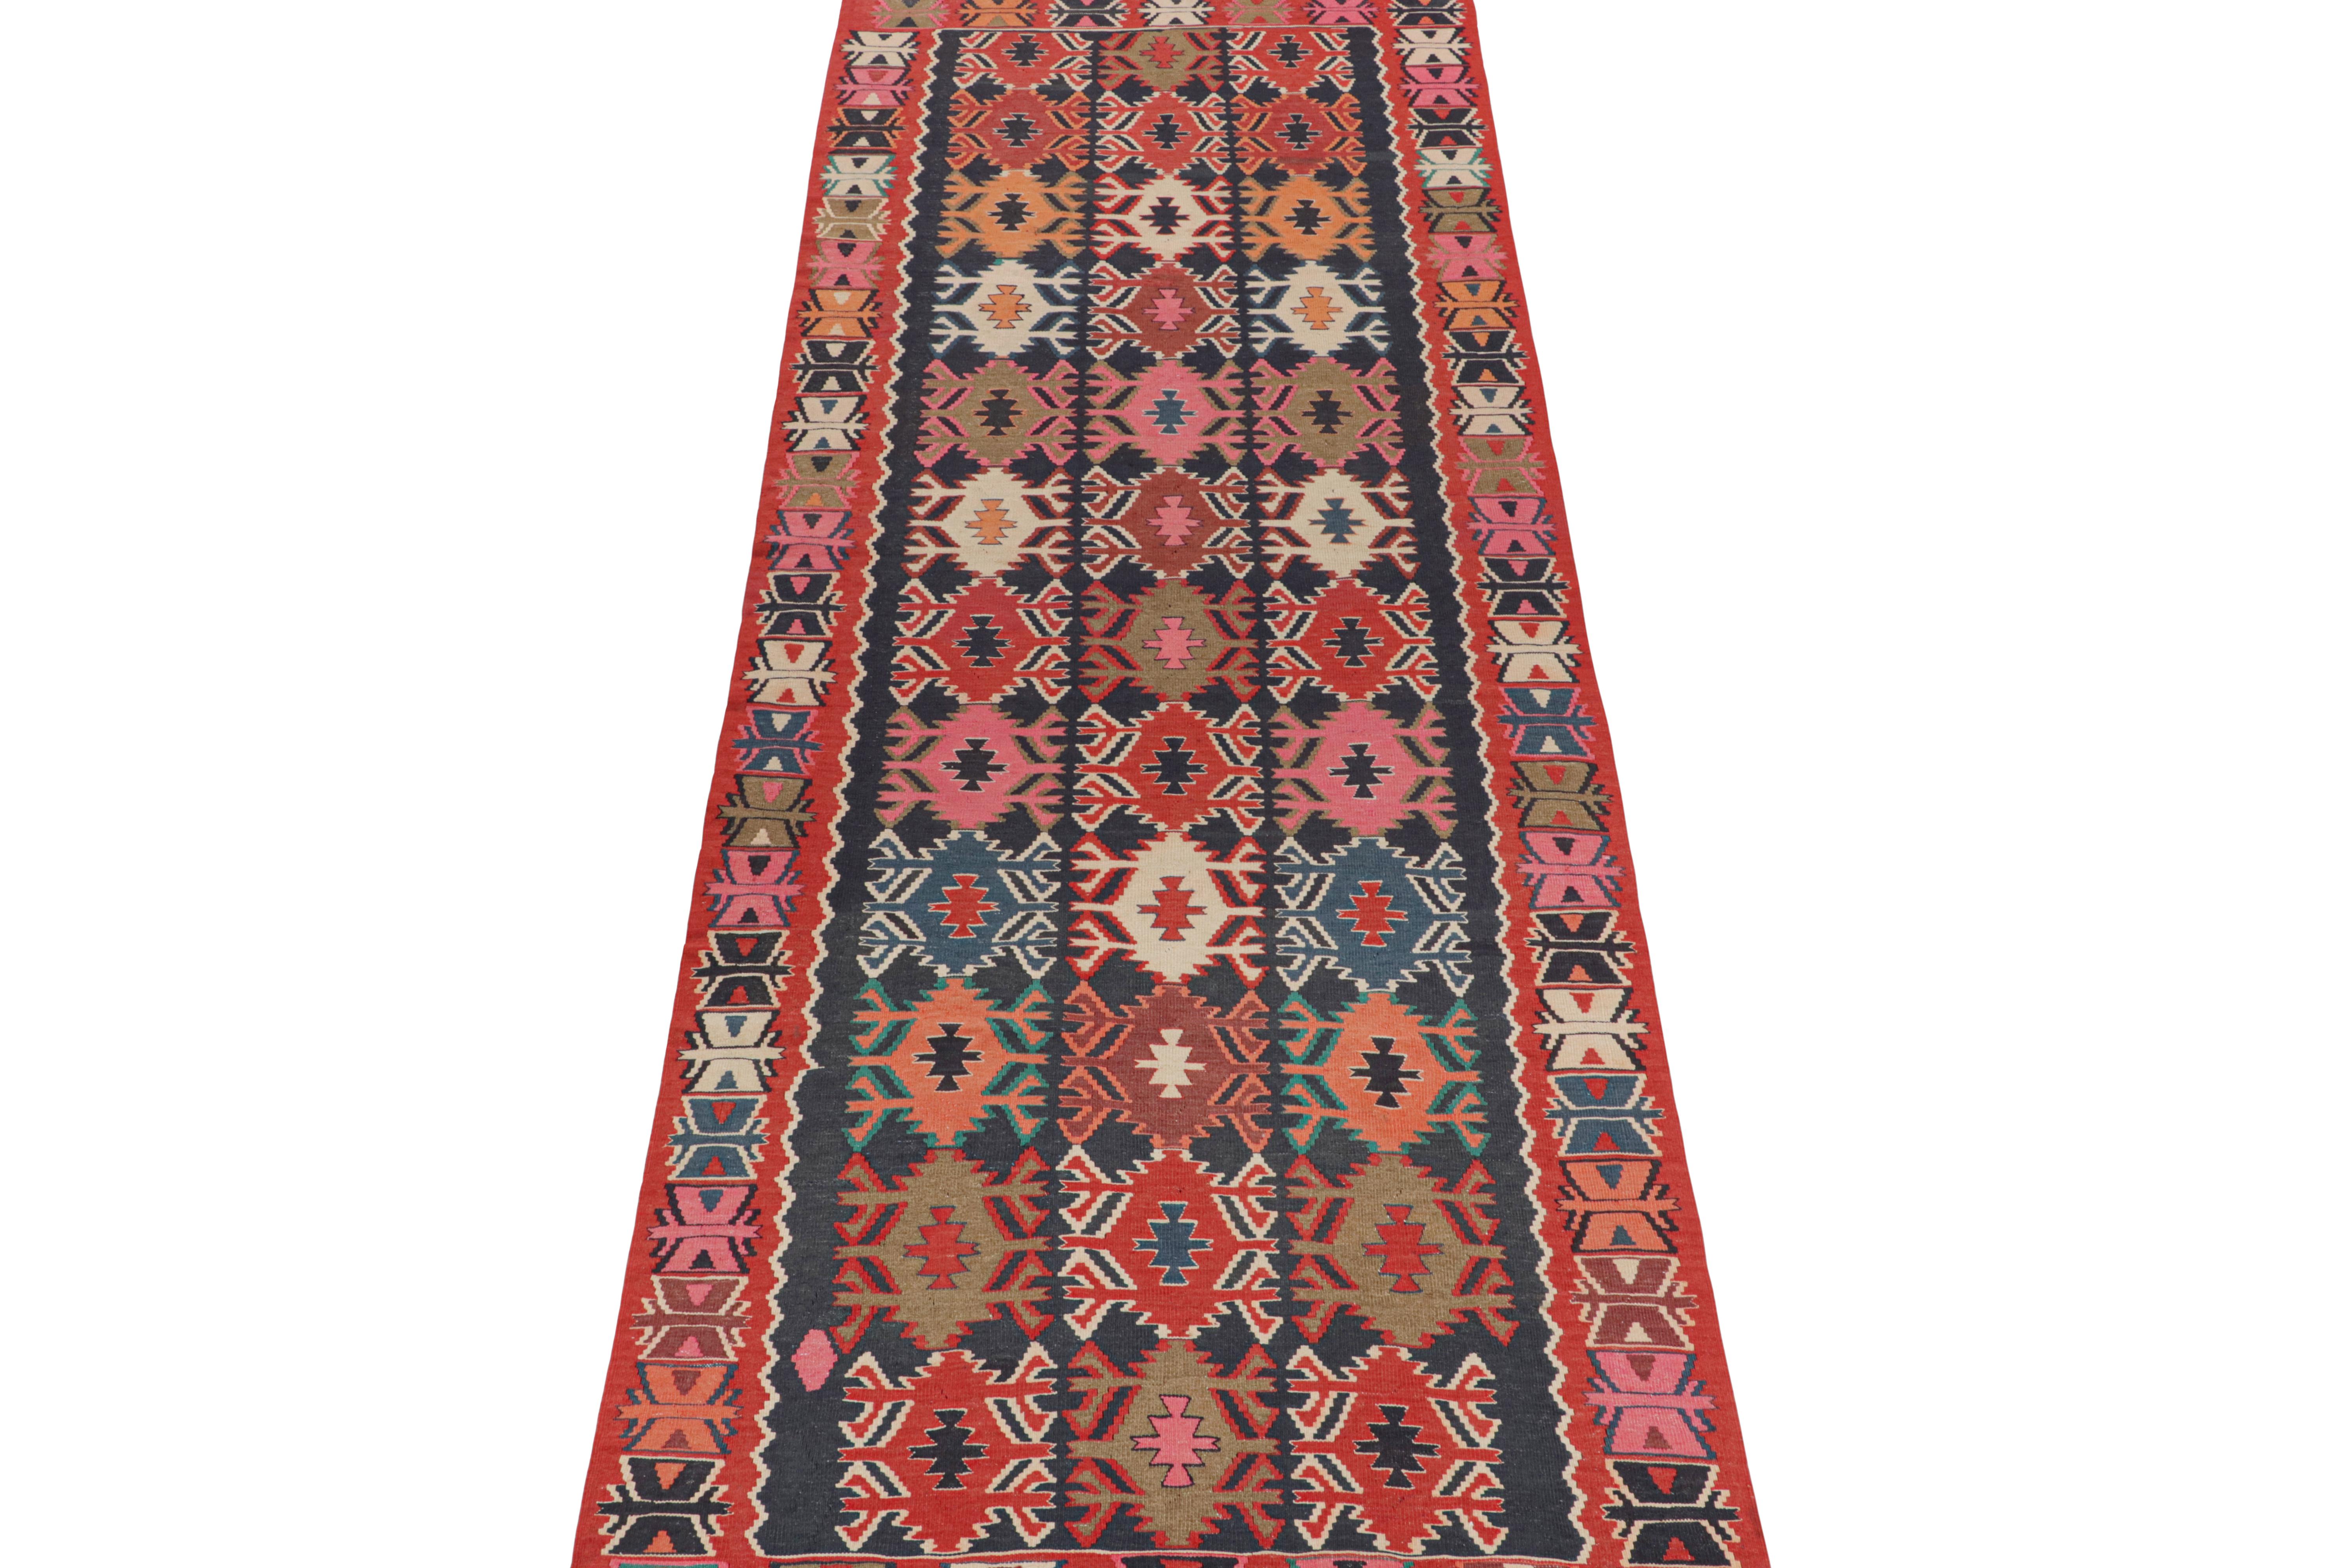 This vintage 5x13 Persian Kilim is a tribal rug believed to hail from Meshkin—a small northwestern village known for its fabulous works. Handwoven in wool, it originates circa 1950-1960.

Further on the Design:

The bold design prefers medallions in